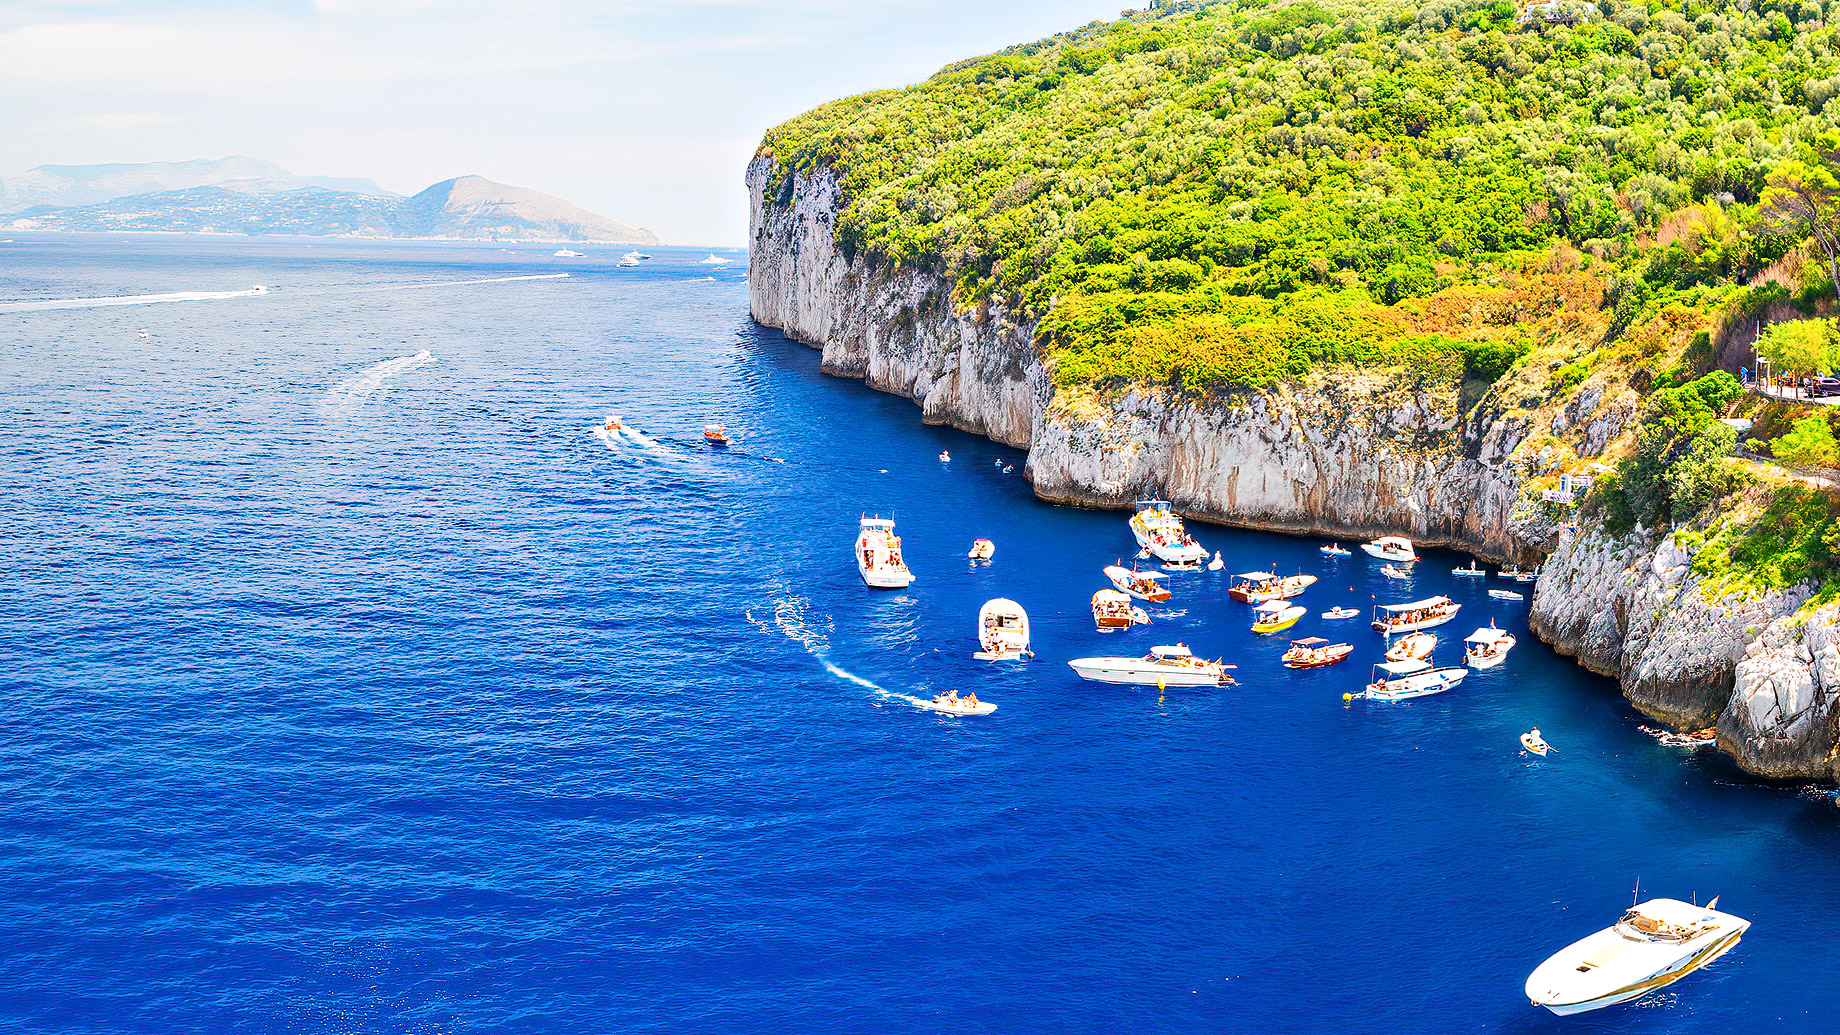 Aerial view of the Blue Grotto